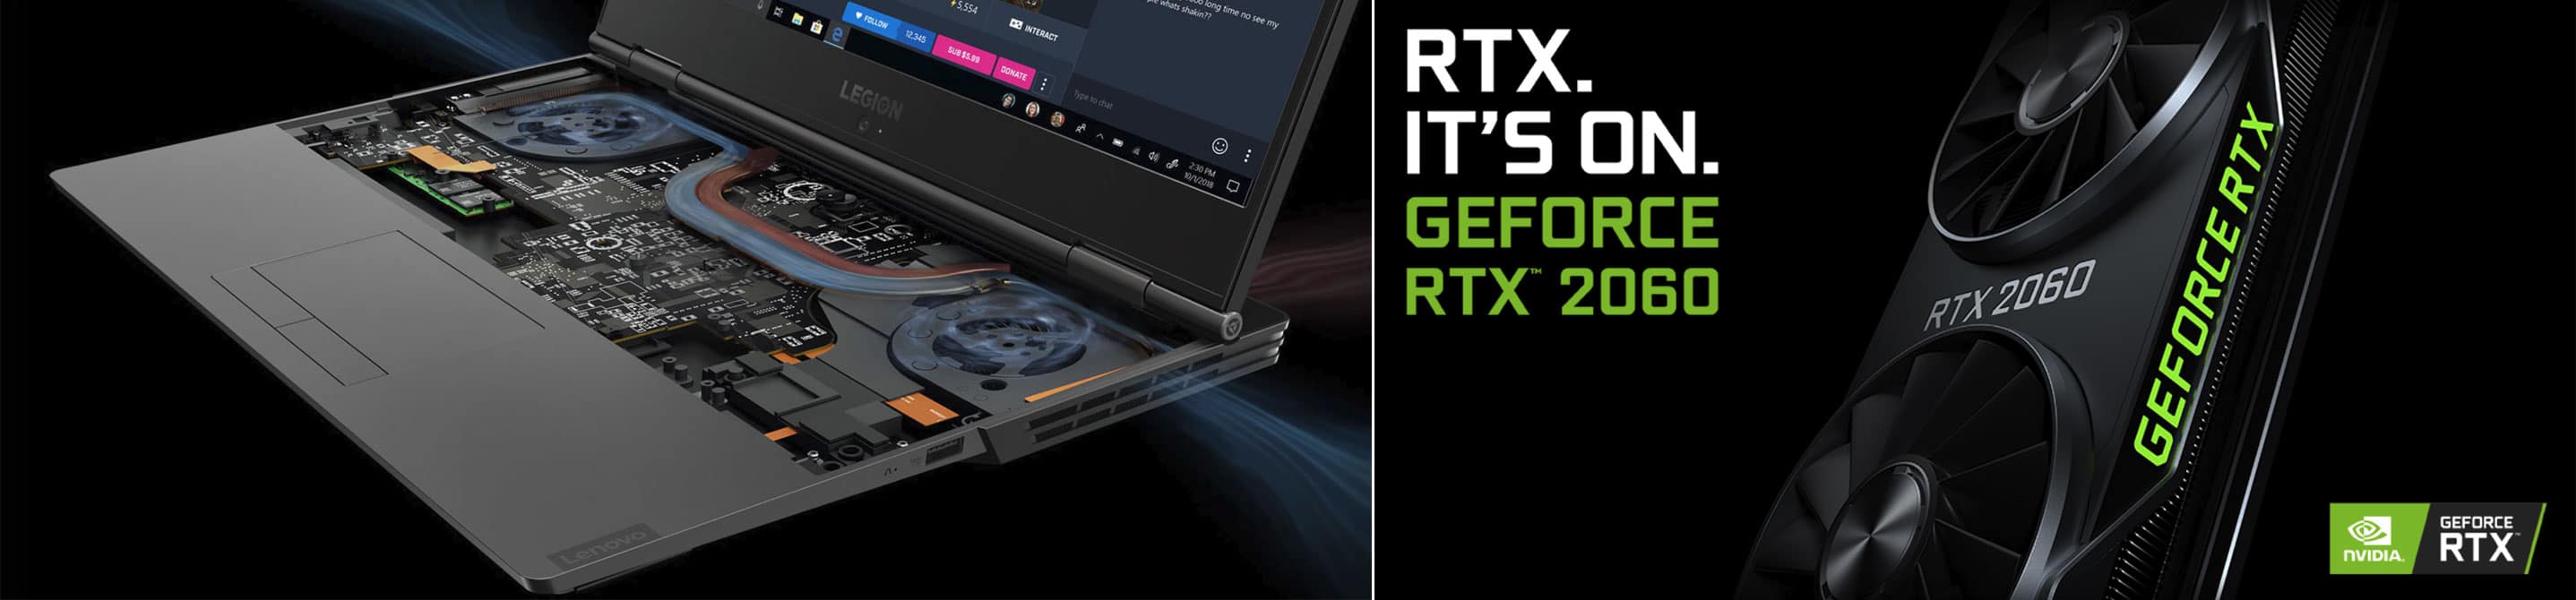 RTX 2060 gaming laptops - the value options in 2019